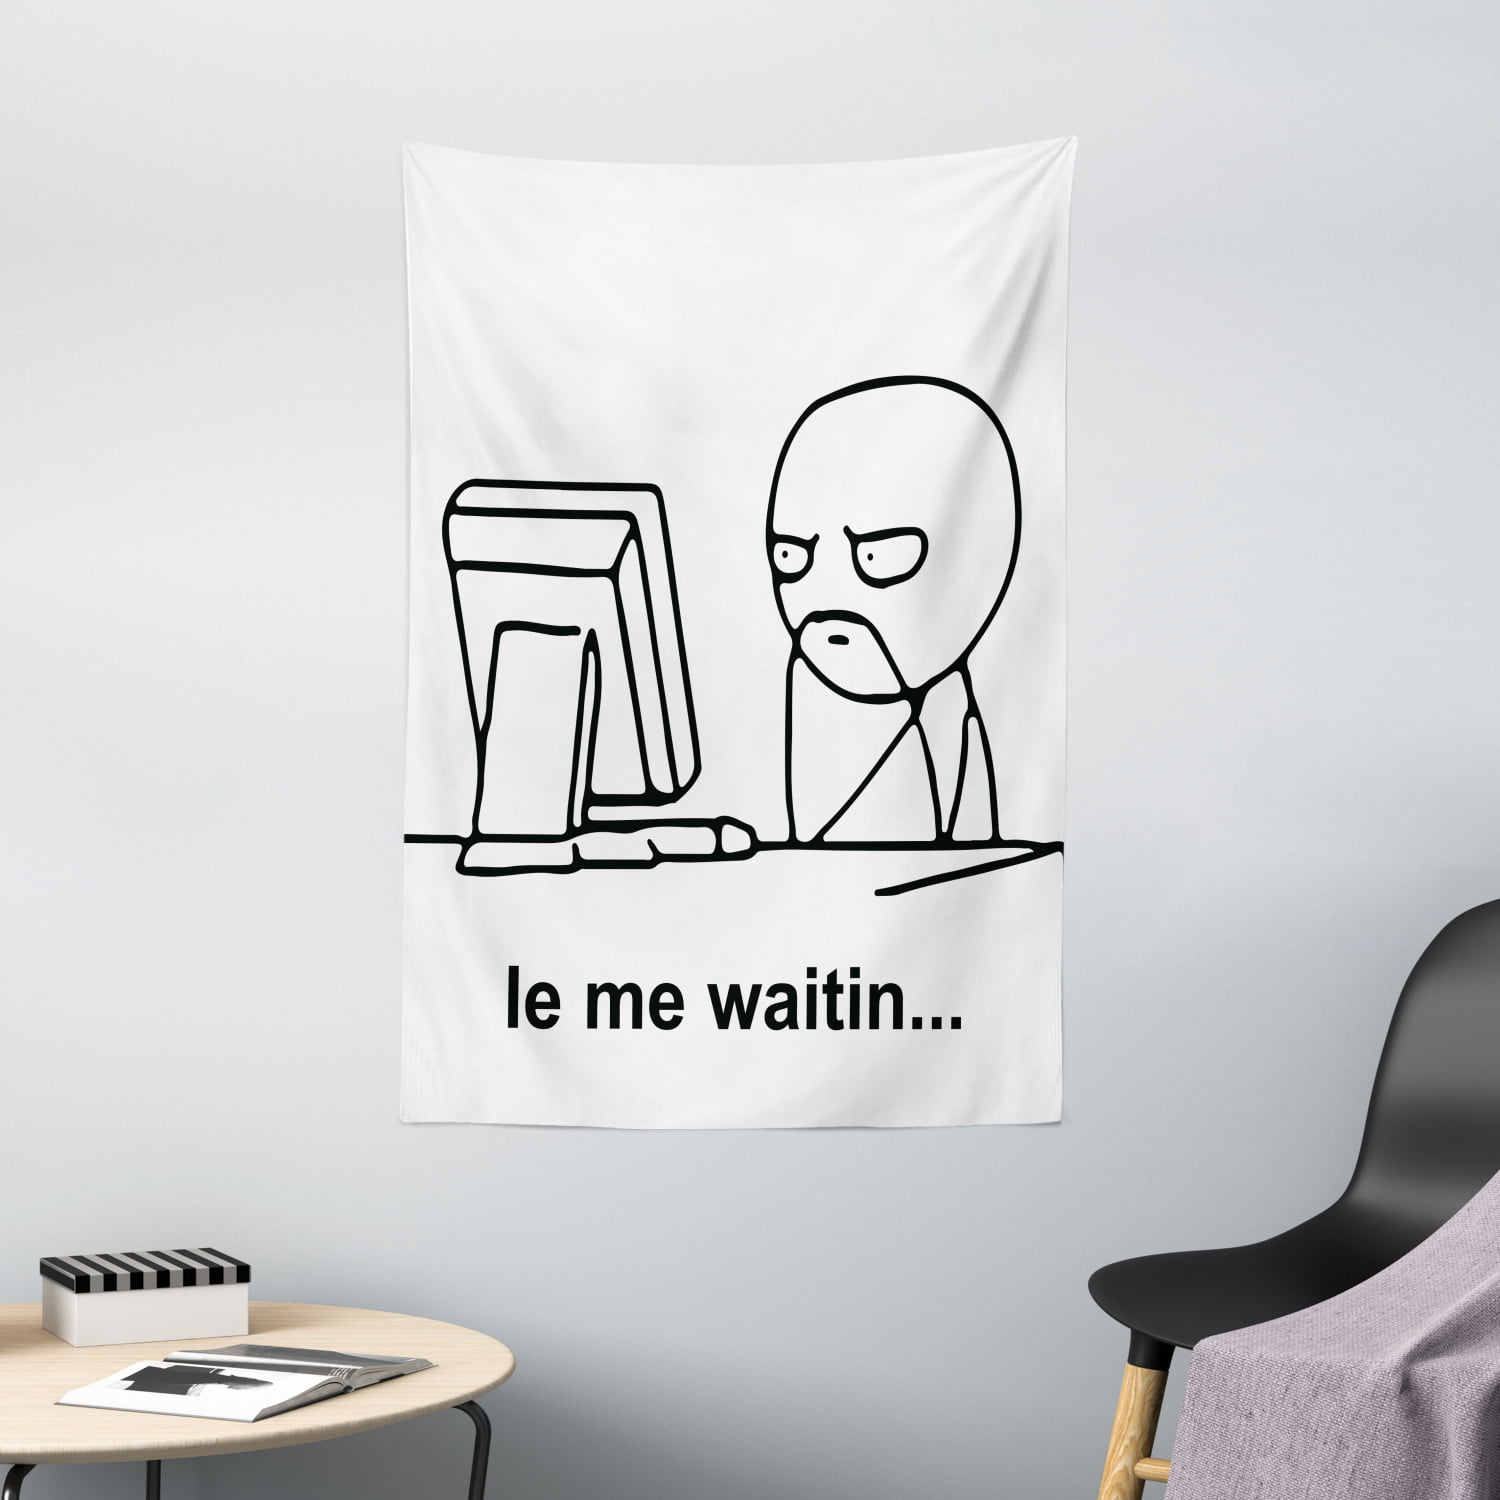 Humor Decor Tapestry, Stickman Meme Face Icon Looking at Computer Joyful  Fun Caricature Comic Design, Wall Hanging for Bedroom Living Room Dorm  Decor